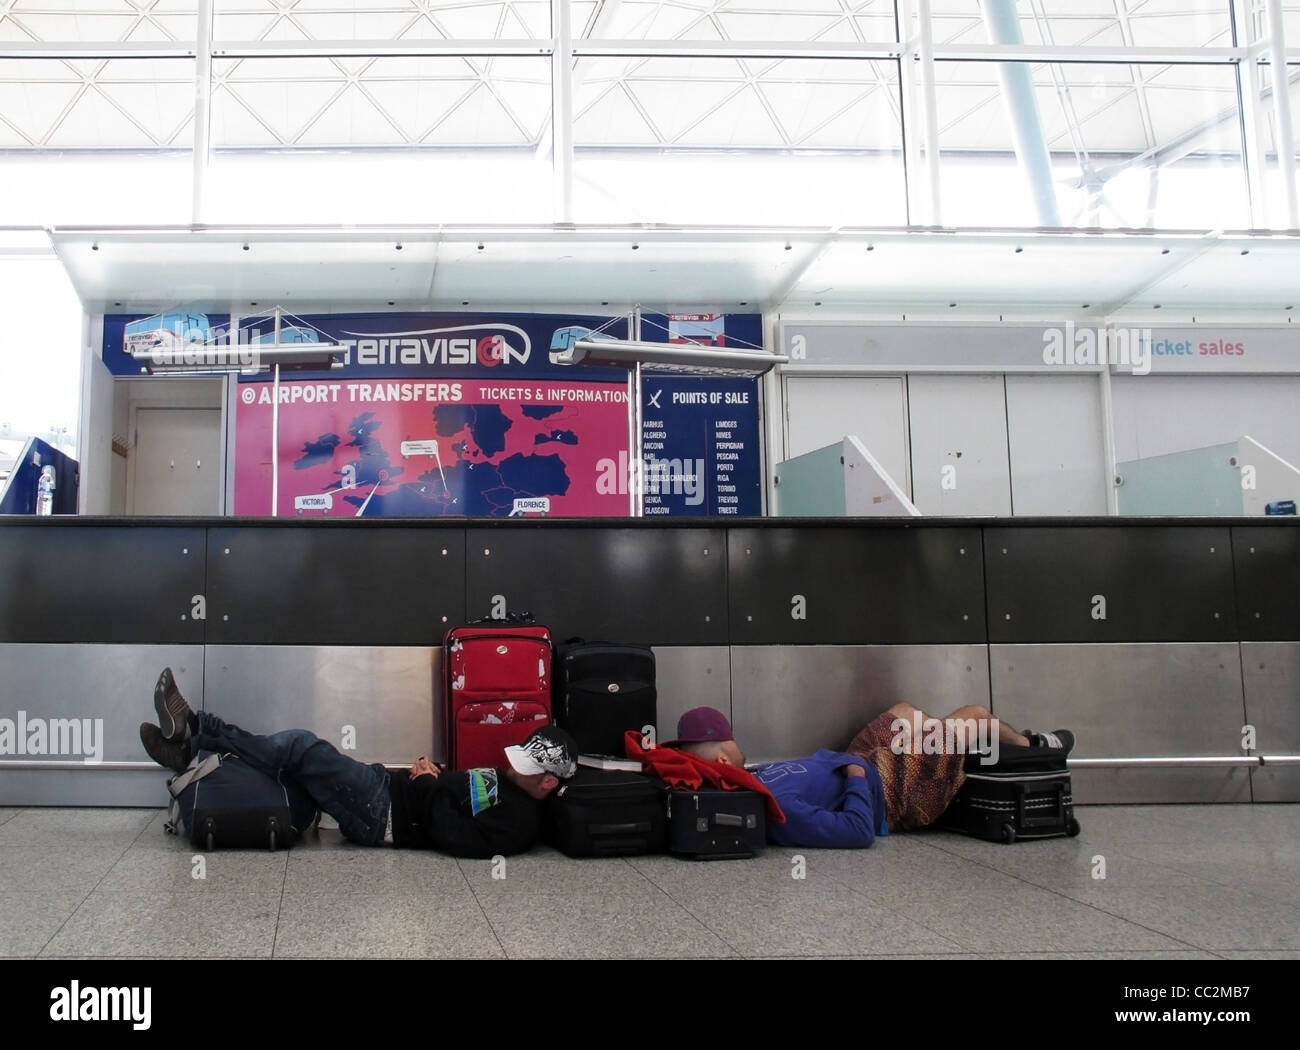 Exhausted travelers wait sleepily for an airport transfer desk to open, at London Stansted Airport Stock Photo